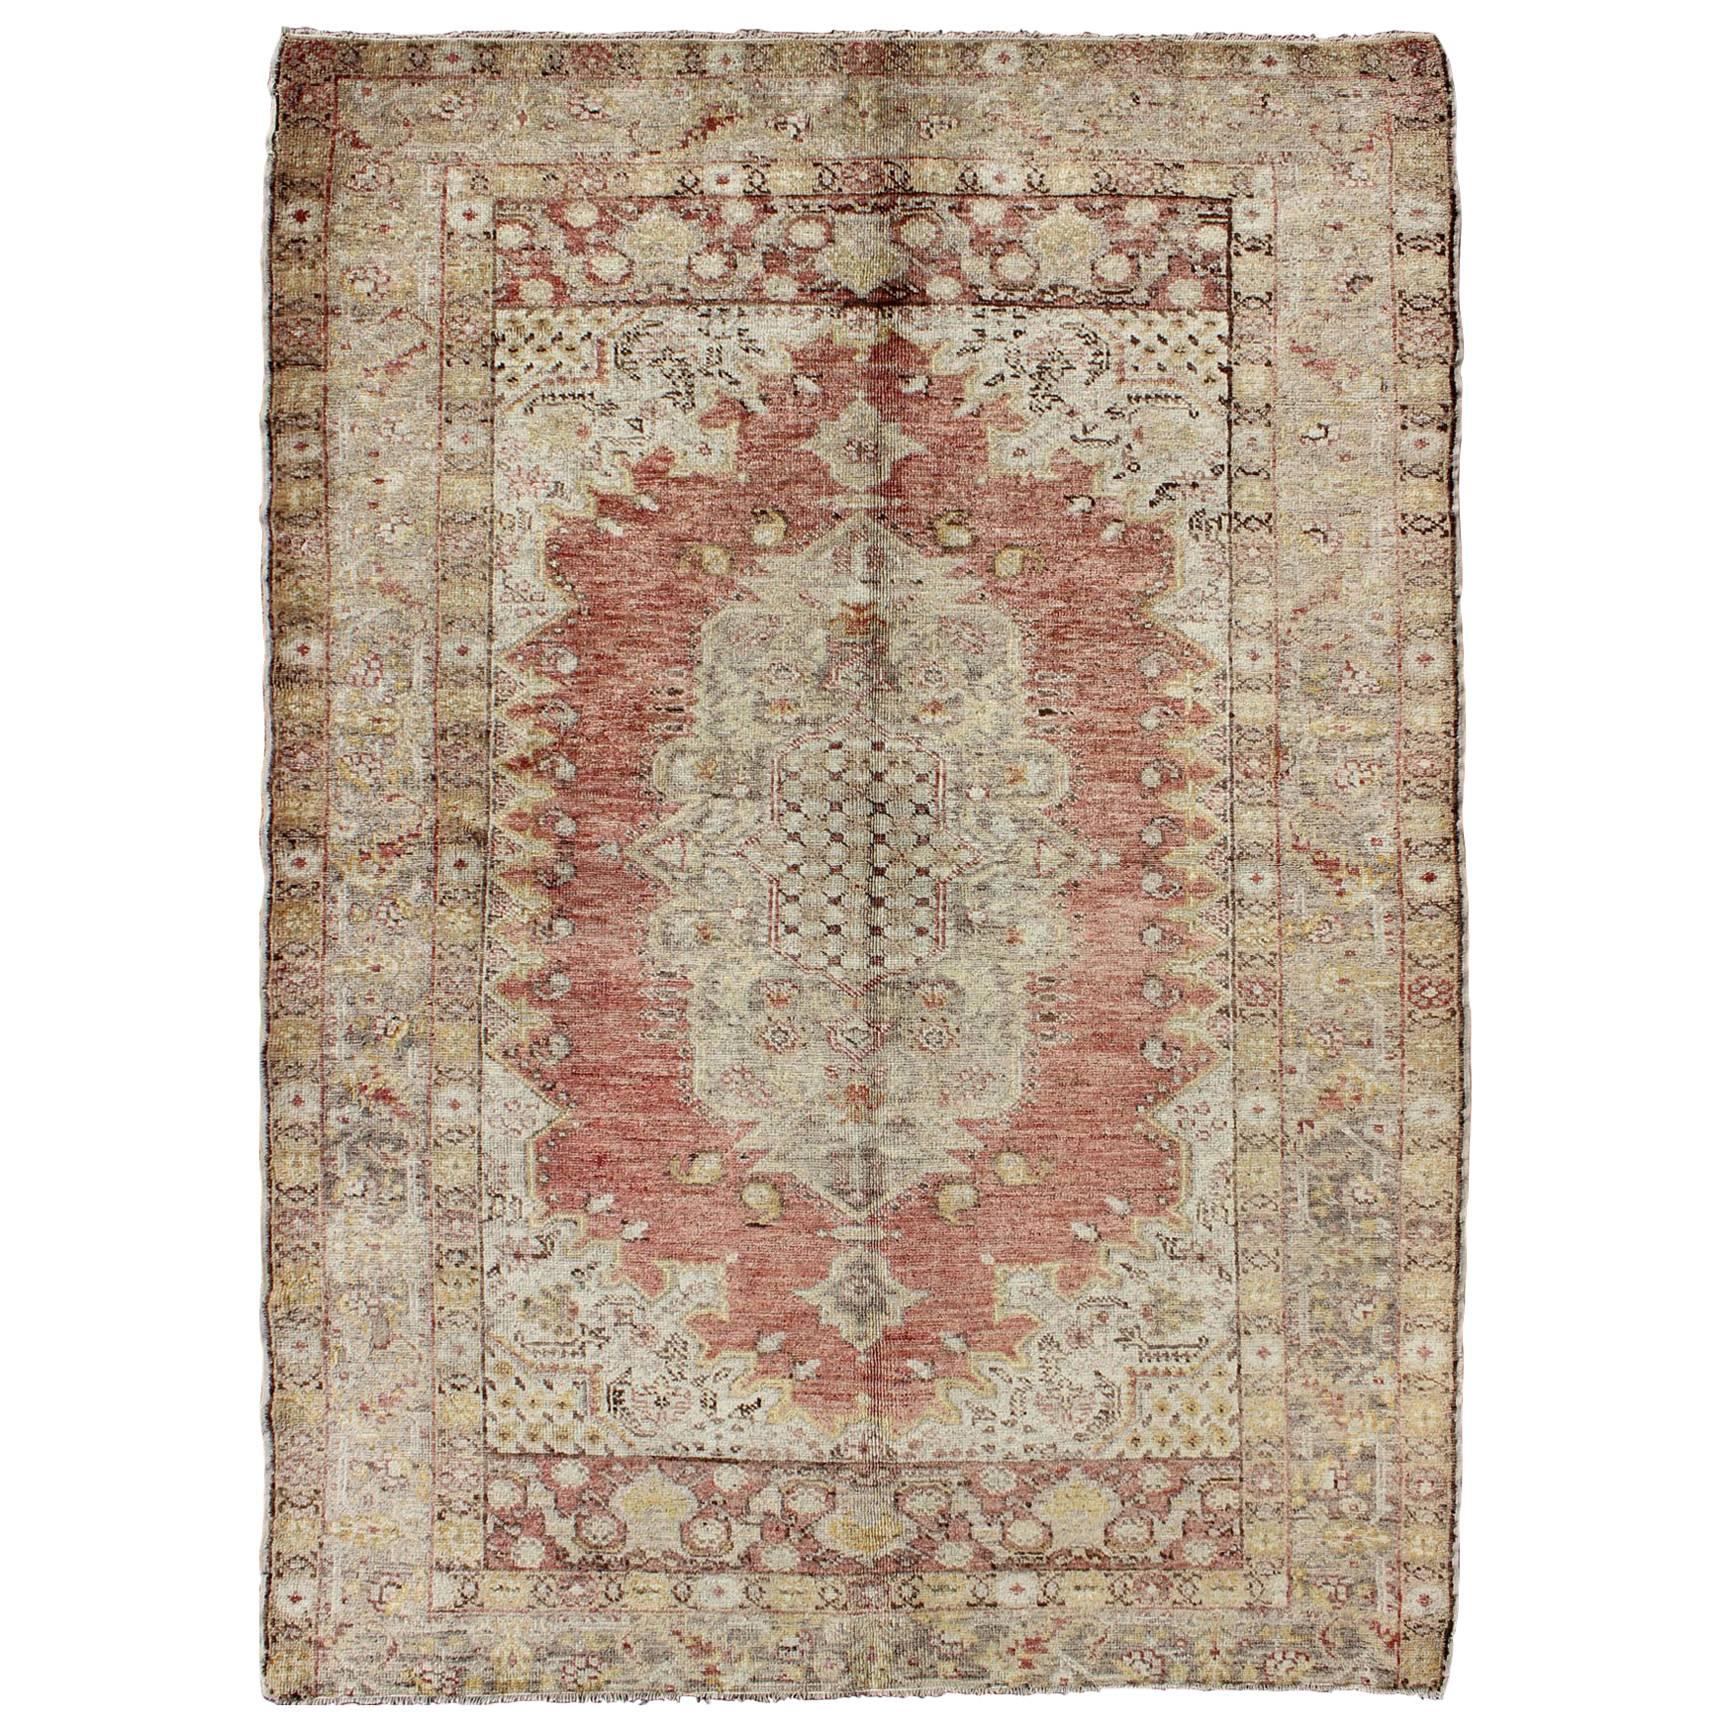 Antique Turkish Sevas Rug with Fine Weave in Cream, Sand and Red